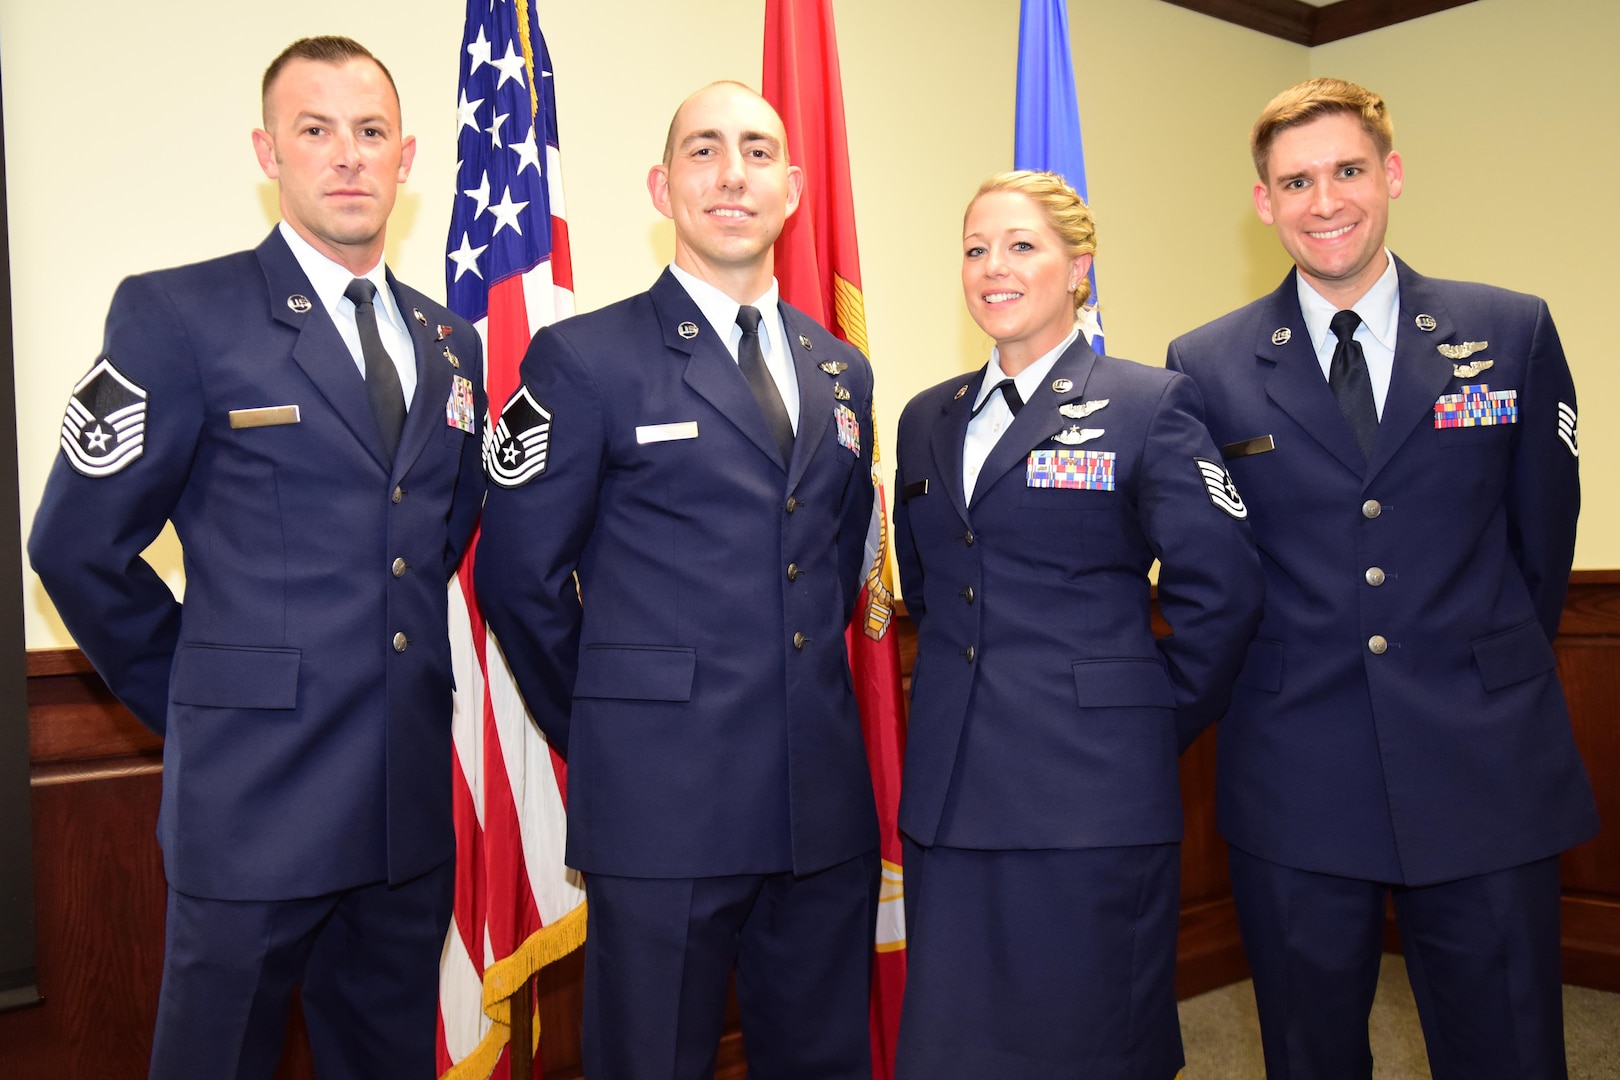 Master Sgt. Christopher, Master Sgt. Raymond, Tech Sgt. Courtney, and Staff Sgt. Matthew pose for a group photo after graduation from Remotely Piloted Aircraft Training at Joint Base San Antonio - Randolph.